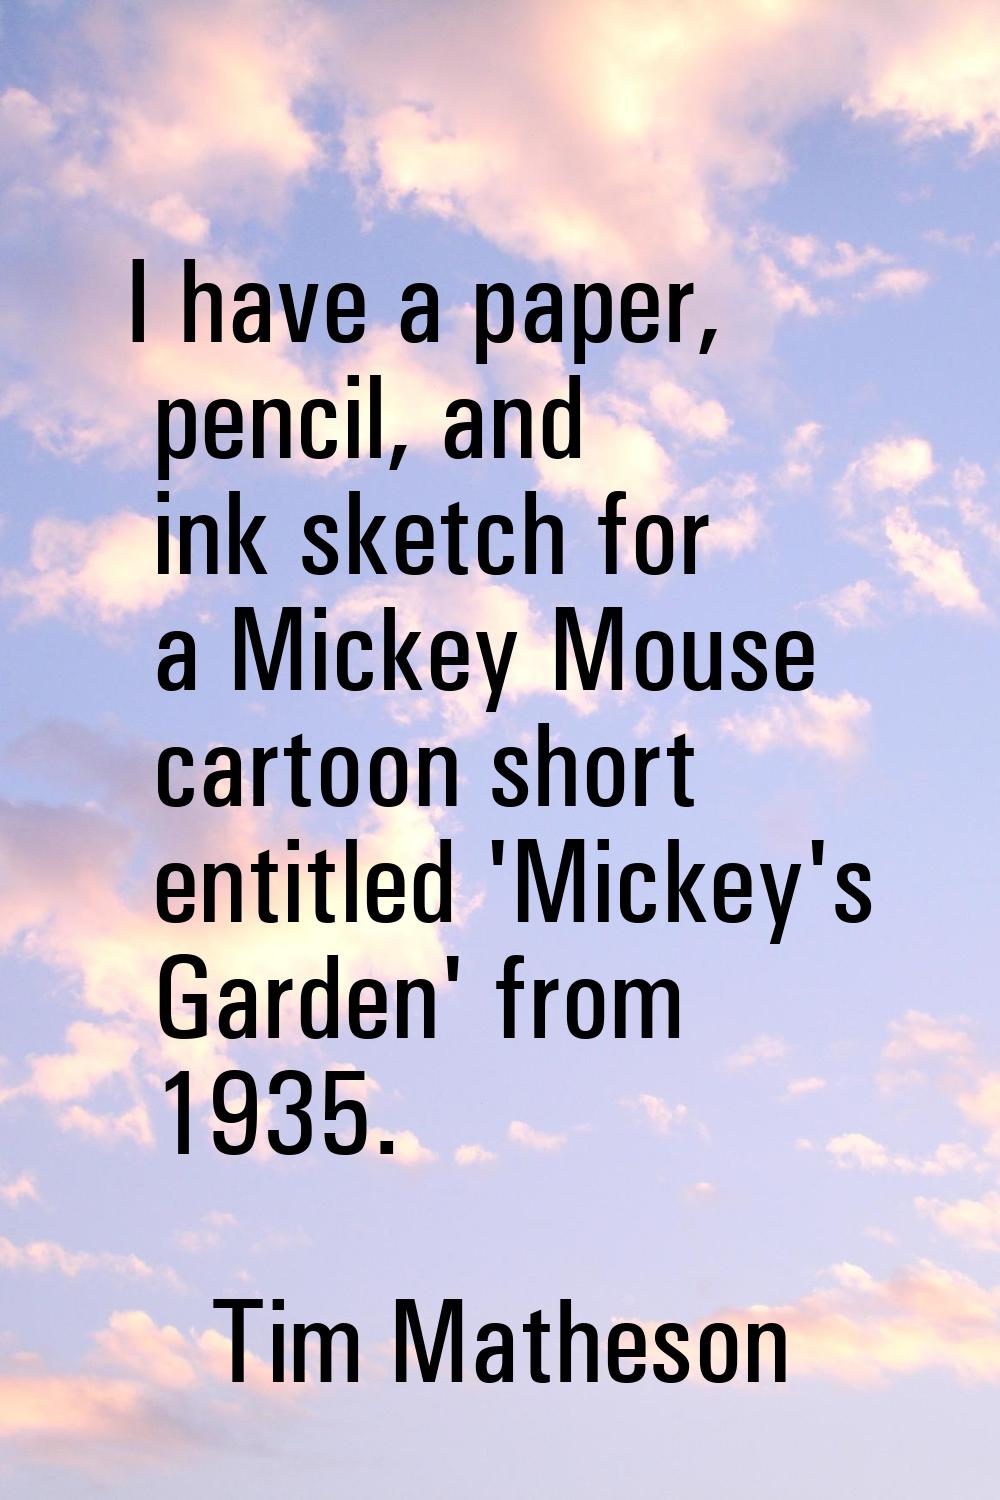 I have a paper, pencil, and ink sketch for a Mickey Mouse cartoon short entitled 'Mickey's Garden' 